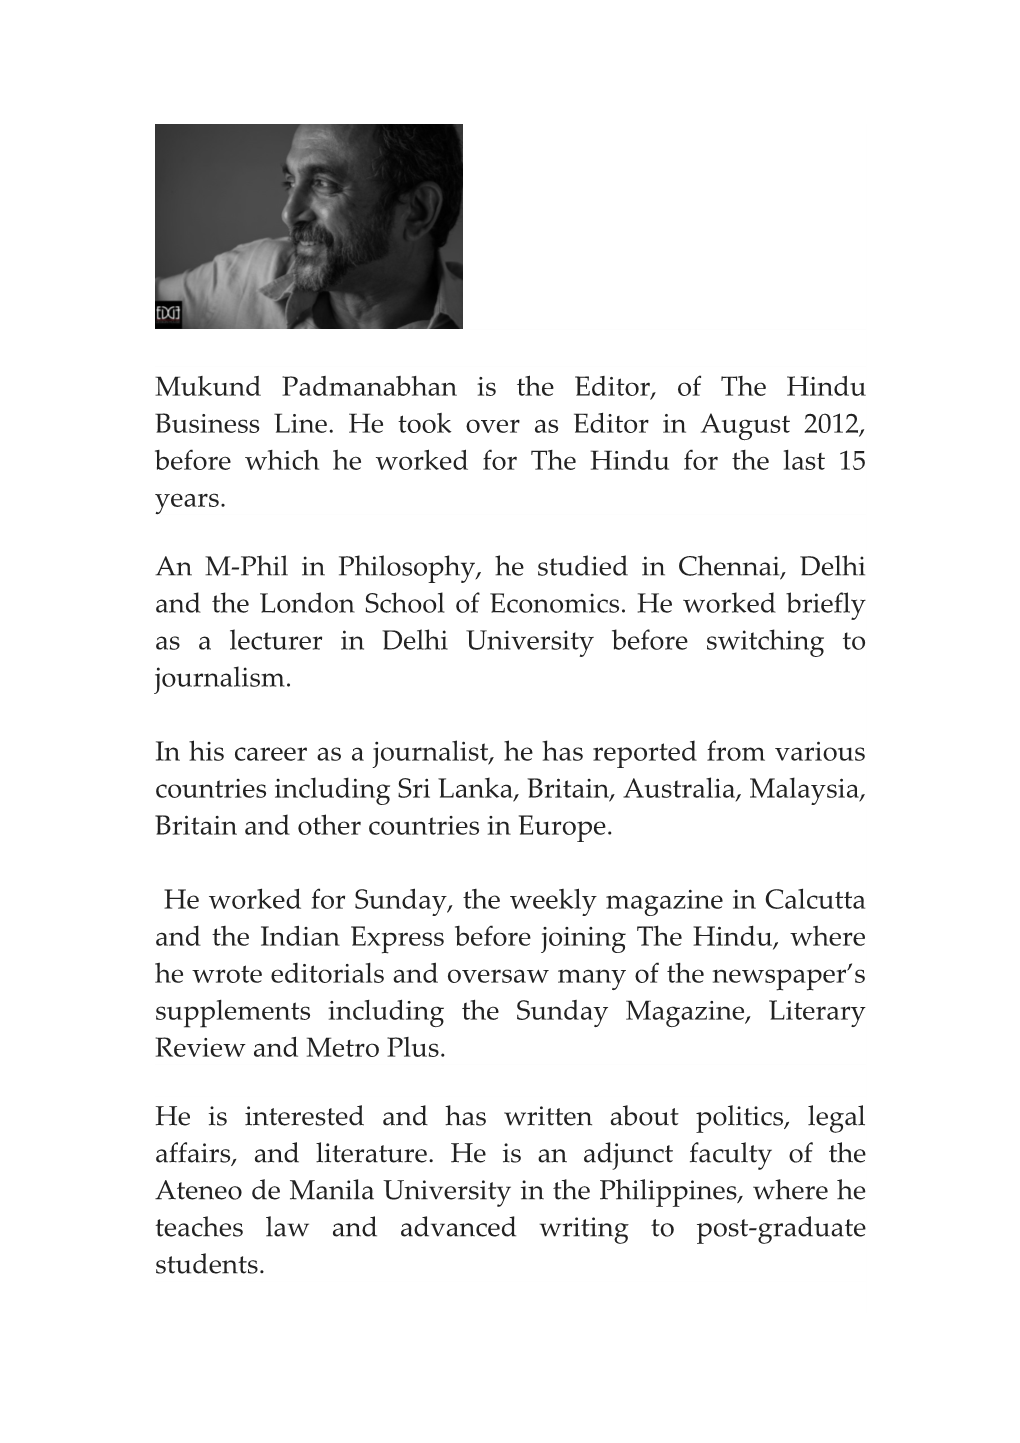 Mukund Padmanabhan Is The Editor, Of The Hindu Business Line